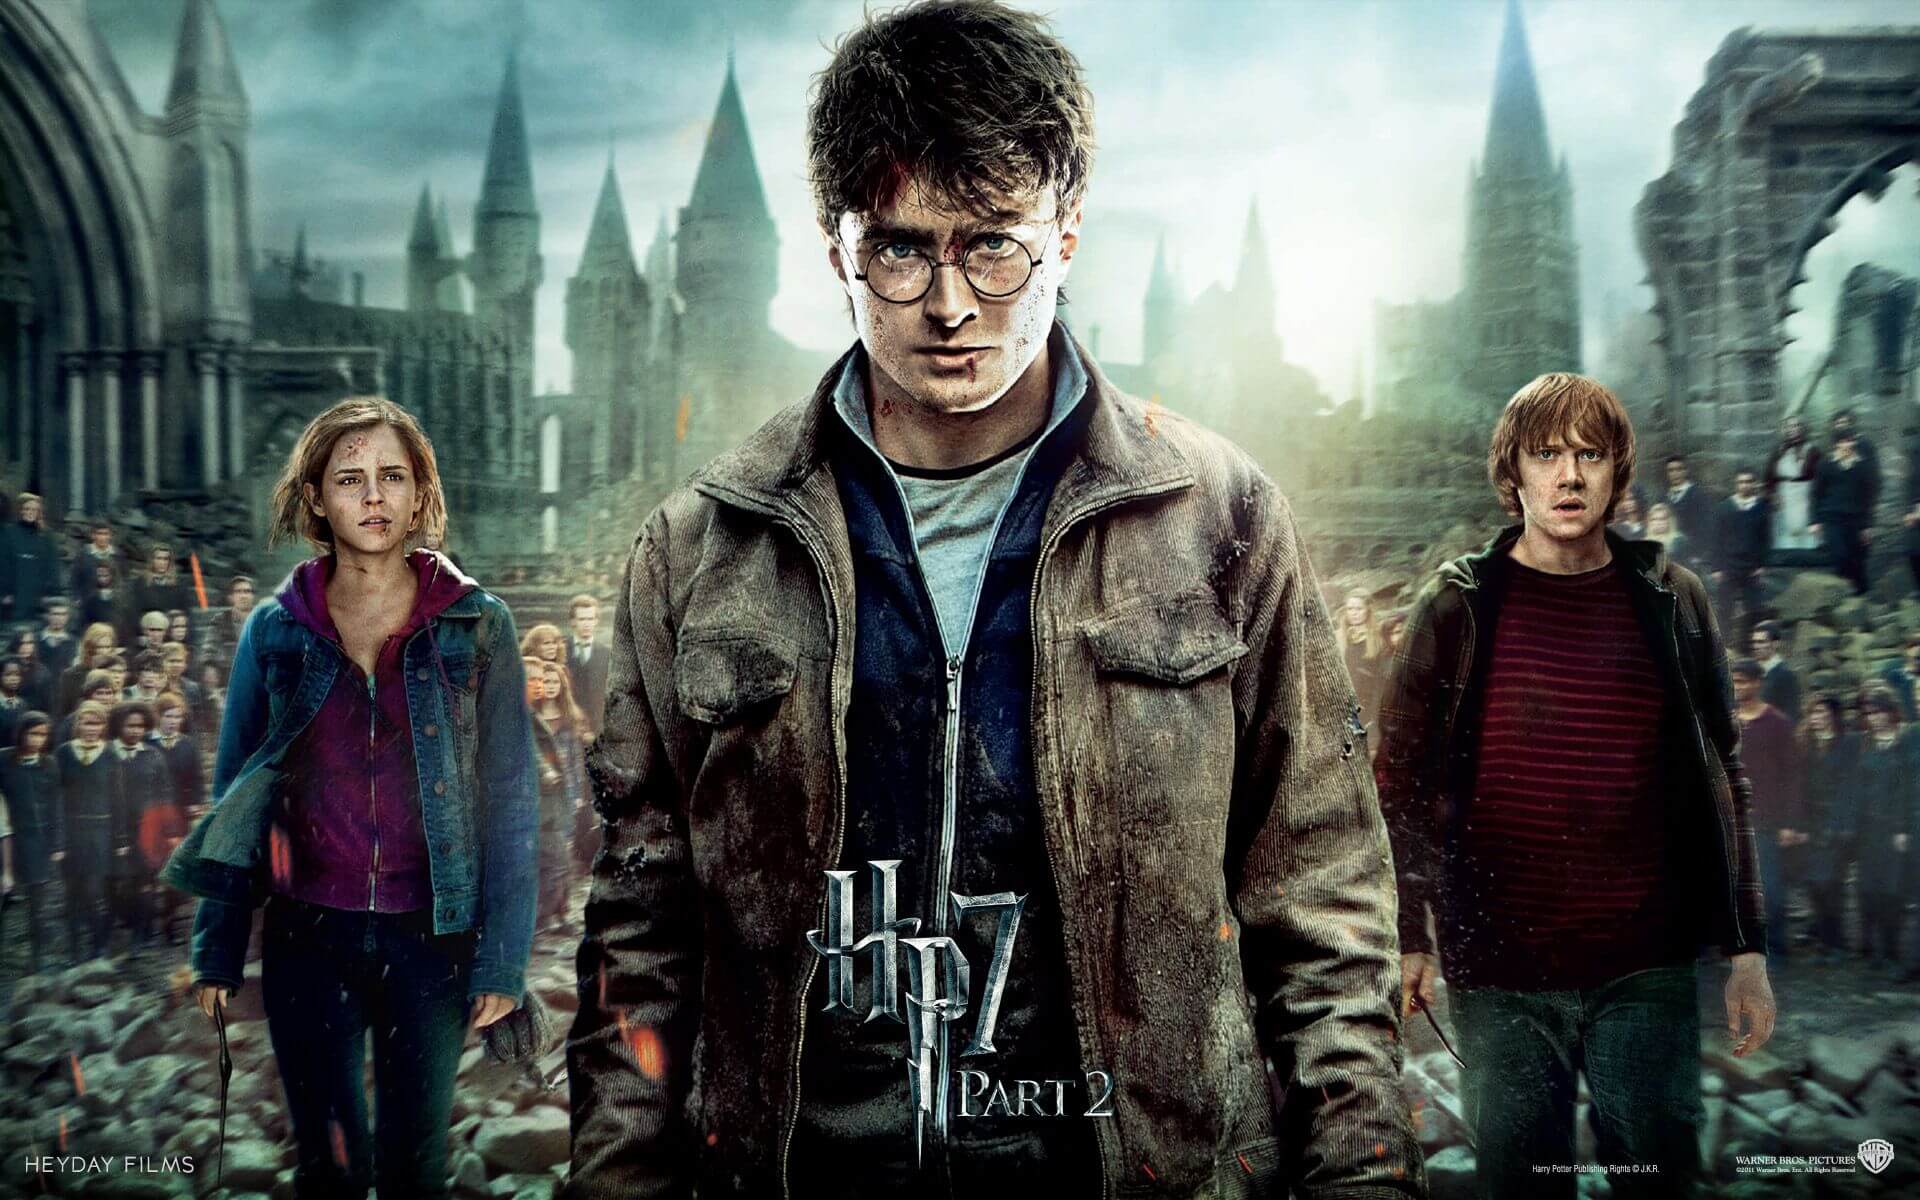 Harry Potter and the Deathly Hallows – Part 2 movie download